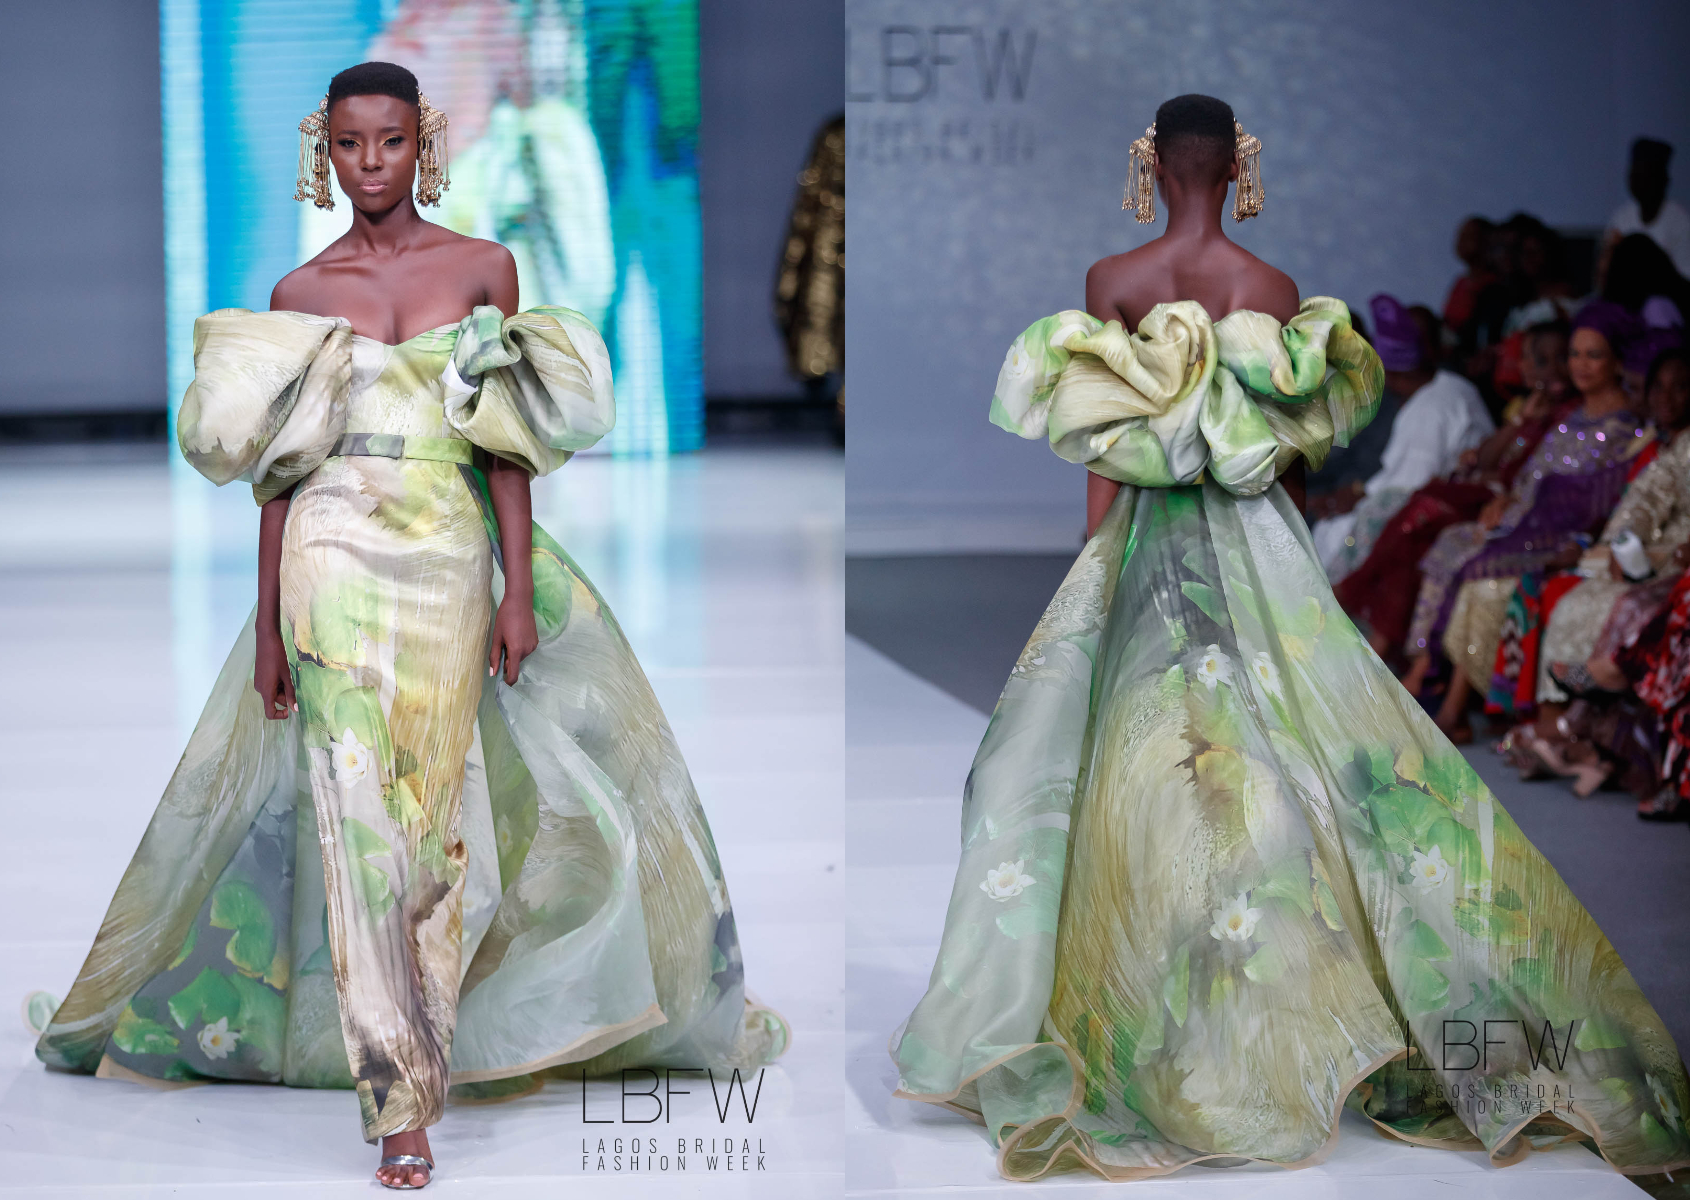 lbfw-day-2-david-tlale-brings-elegant-couture-to-the-runway-with-his-first-ever-bridal-collection